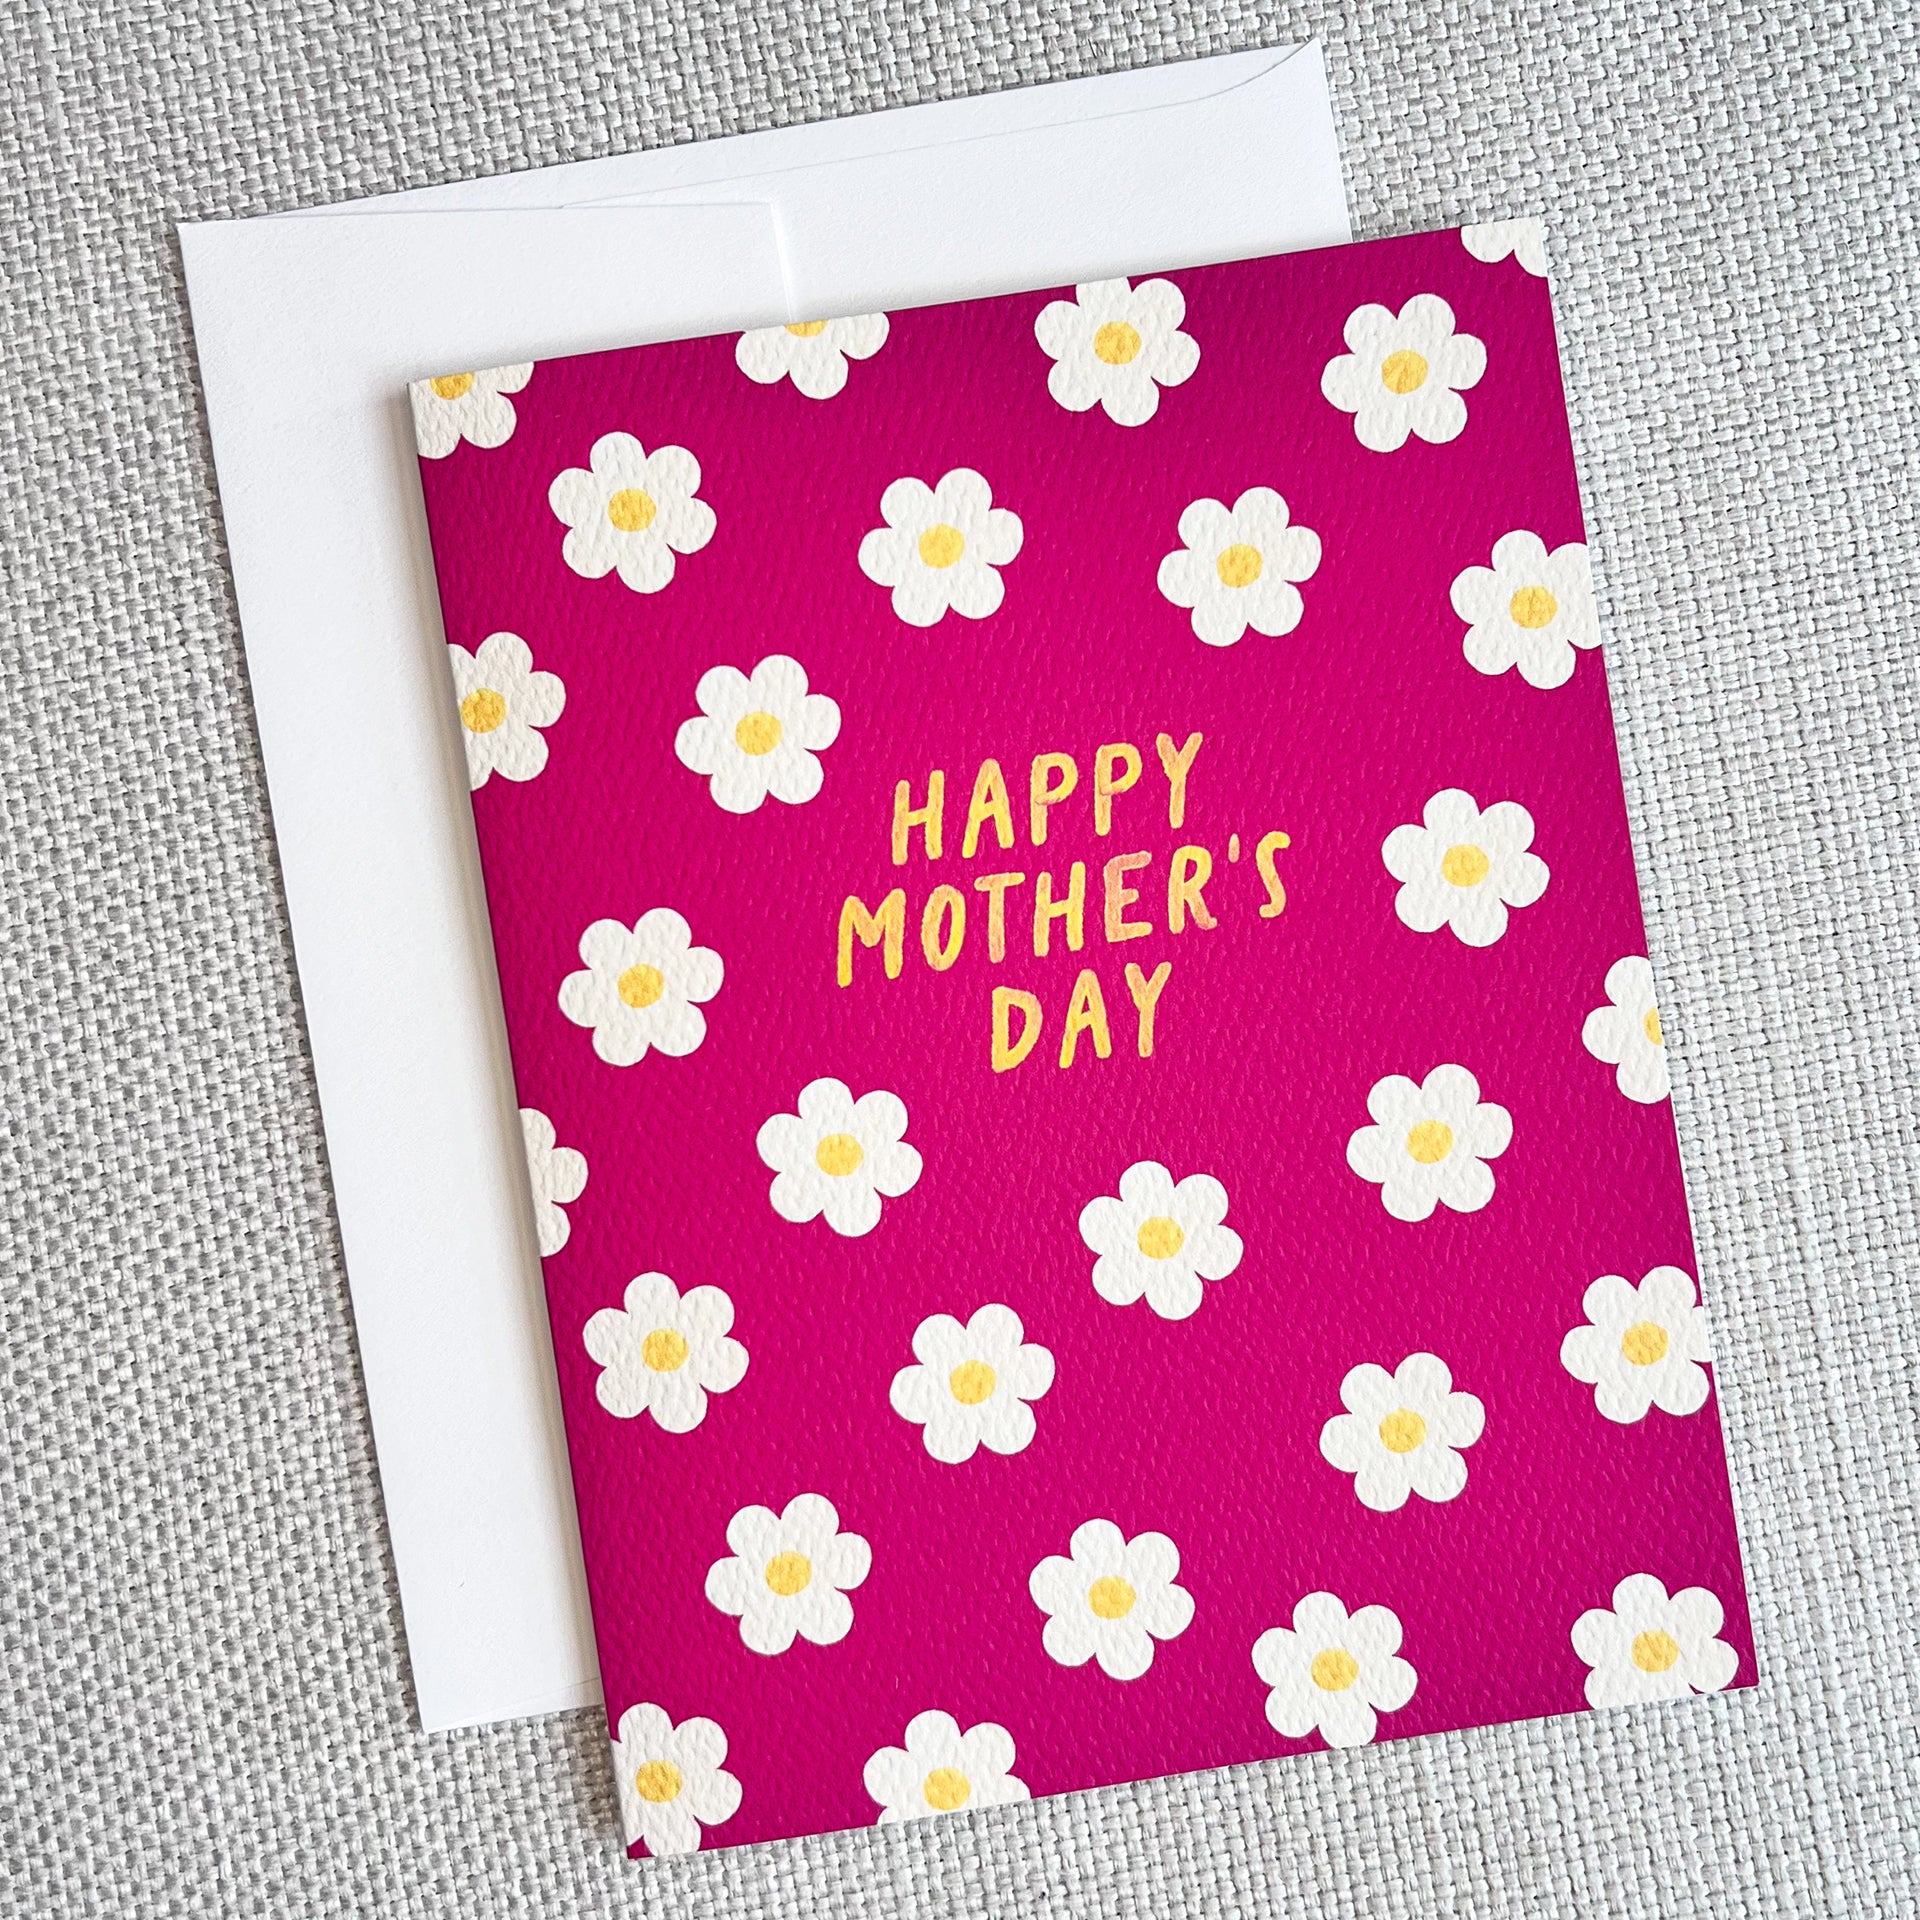 Daisy Mother's Day Card by Gert & Co